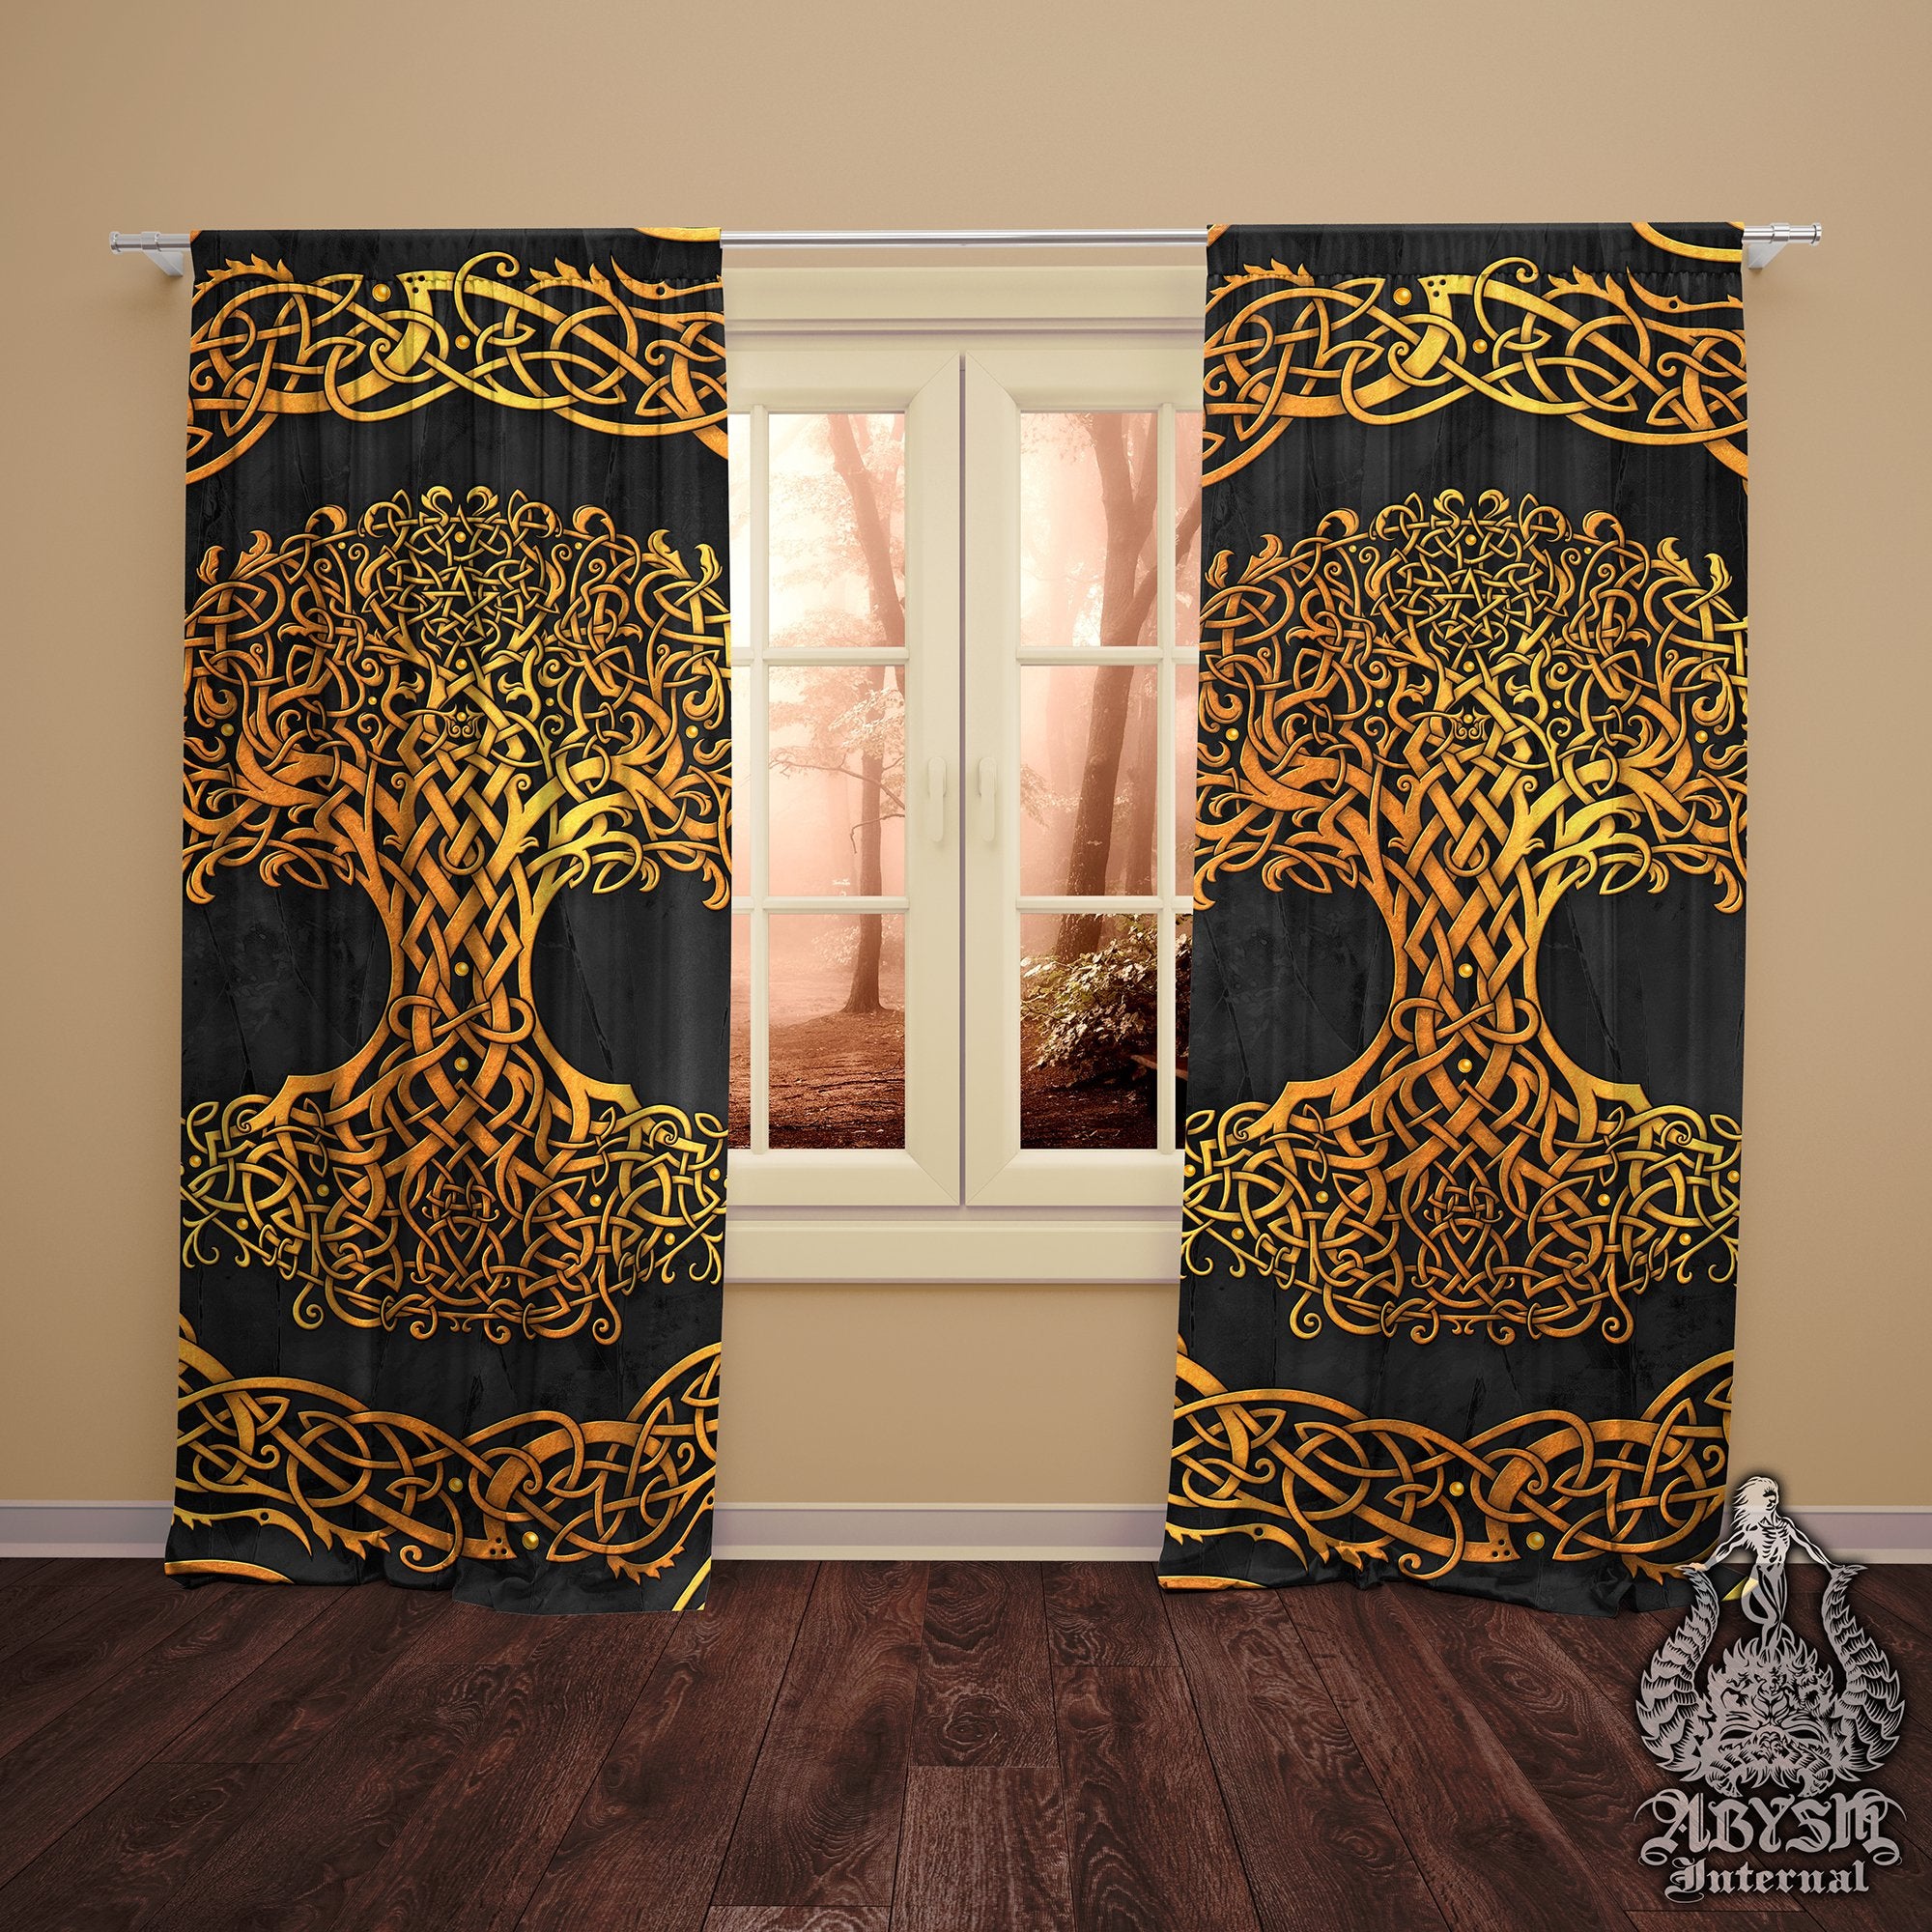 Celtic Curtains, 50x84' Printed Window Panels, Tree of Life, Indie and Pagan Room Decor, Art Print, Funky and Eclectic Home Decor - Gold and 3 Colors - Abysm Internal